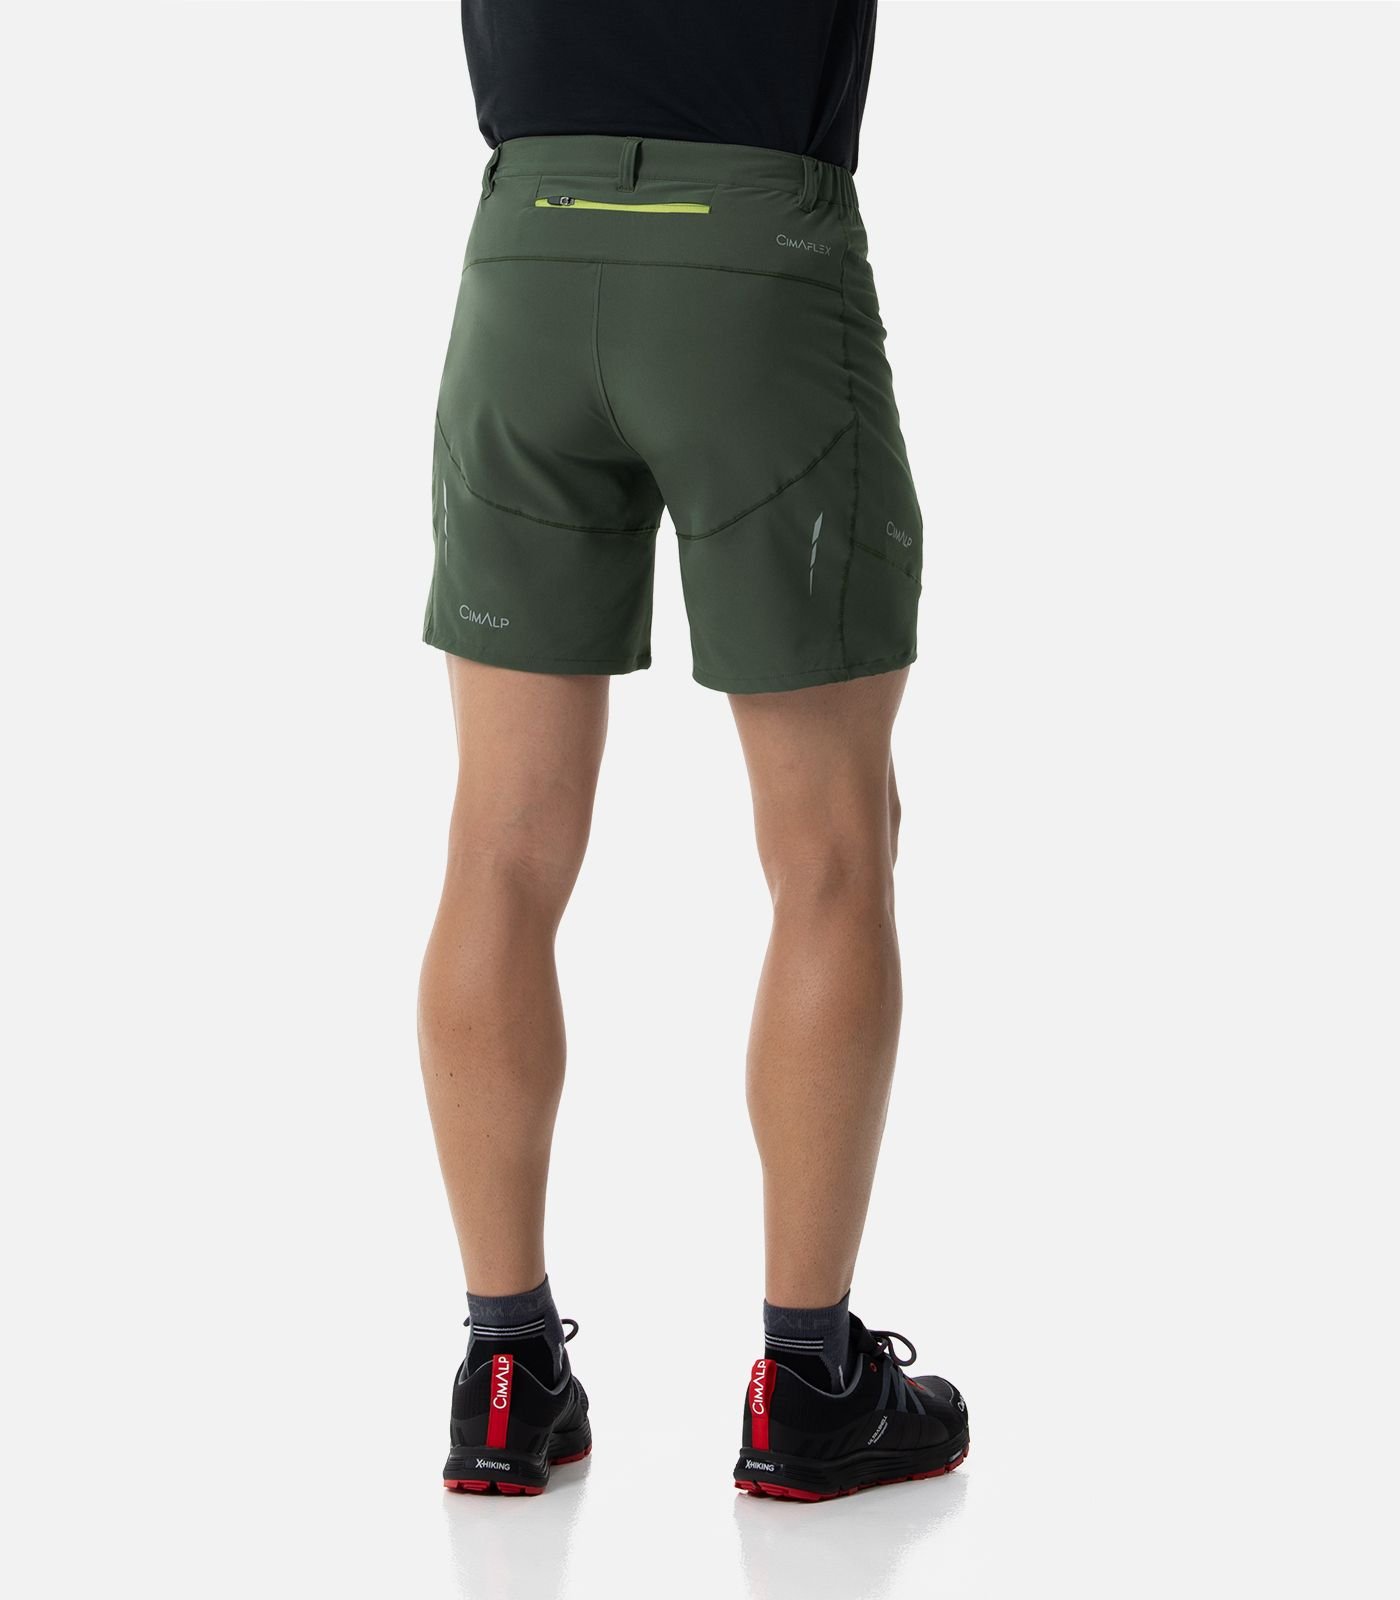 Highly stretchable & Ultralight Shorts